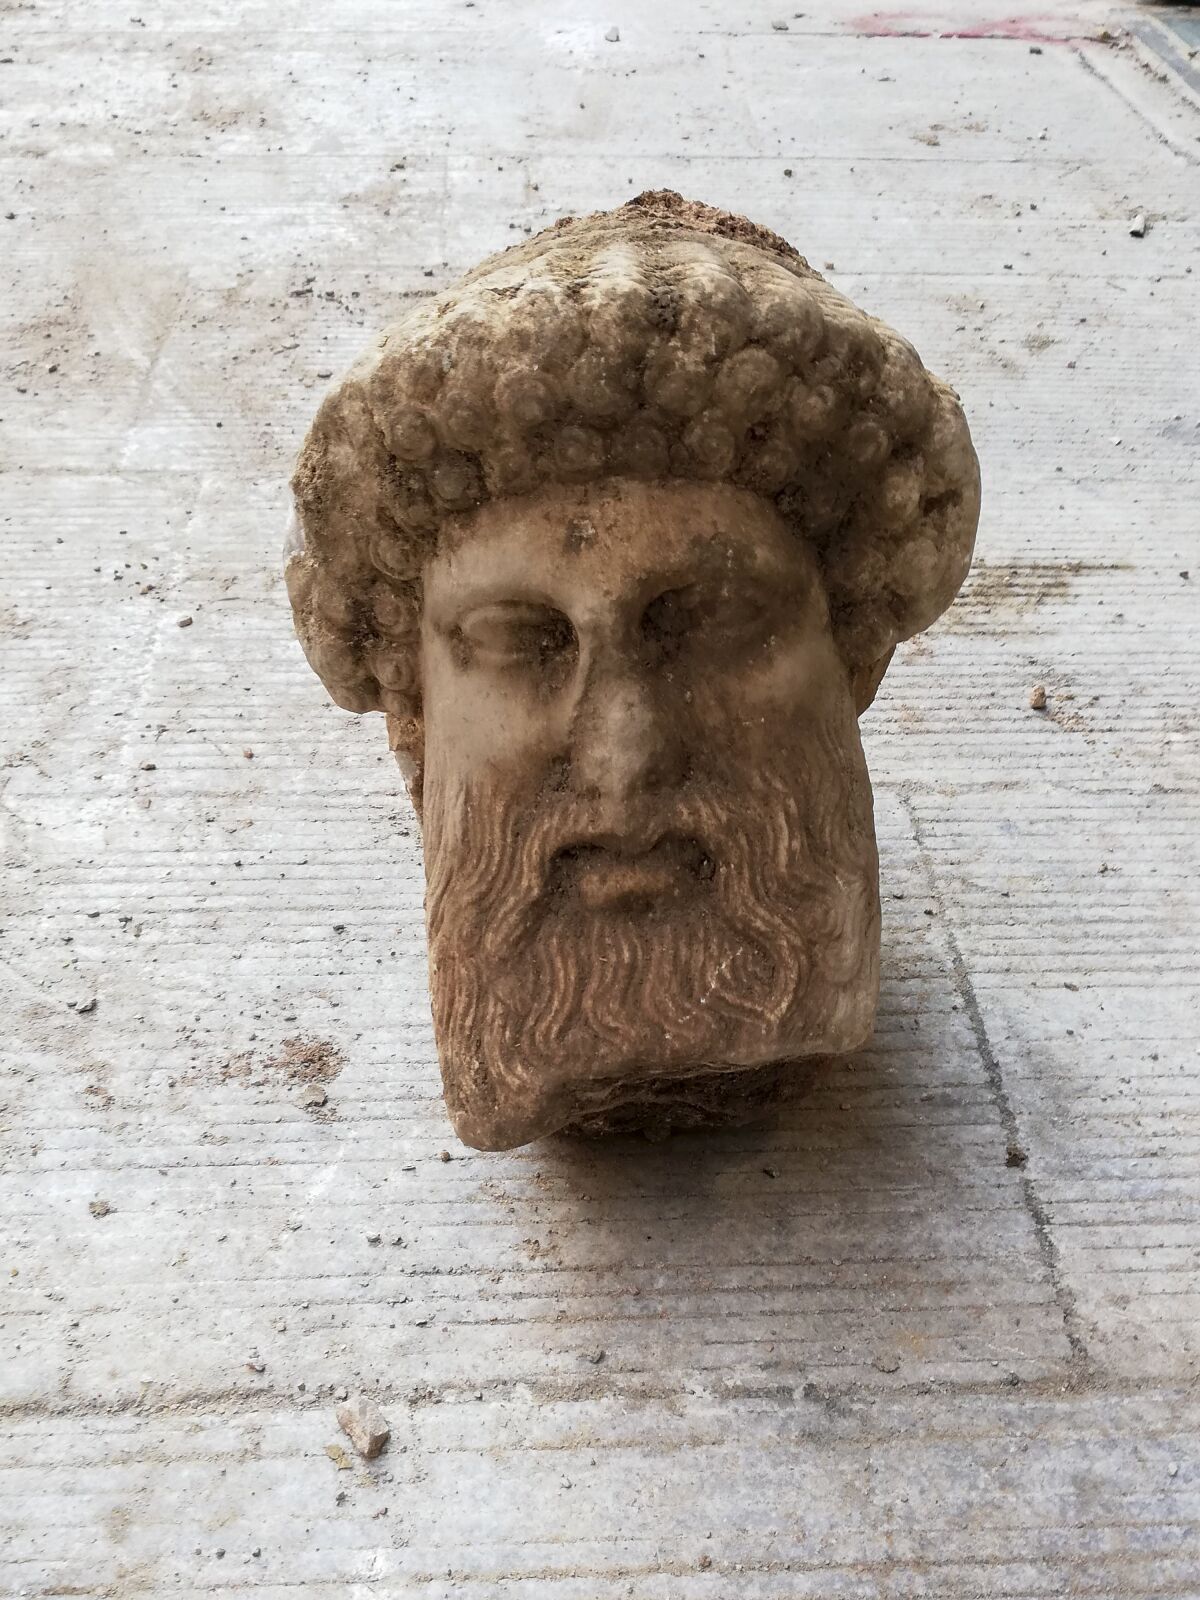 Ancient bust of the Greek god Hermes that was found during sewage work in central Athens.